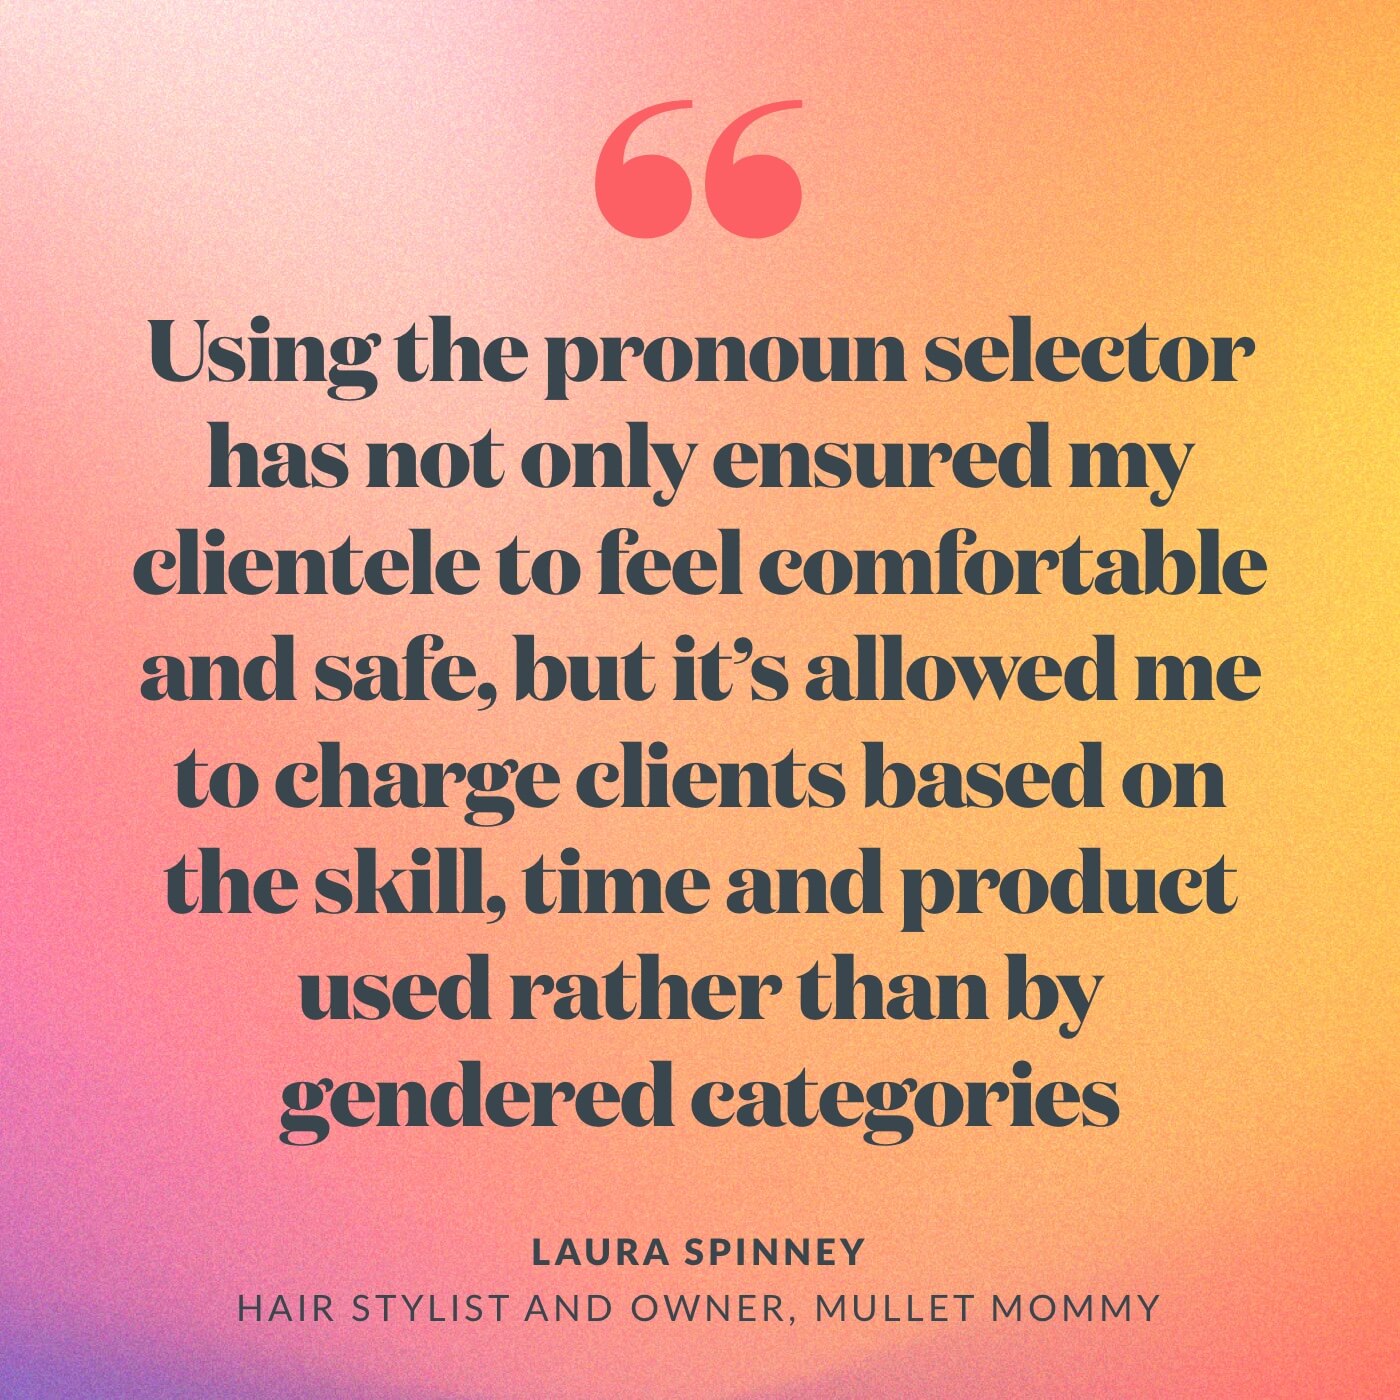 “Using the pronoun selector has not only ensured my clientele to feel comfortable and safe, but it’s allowed me to charge clients based on the skill, time and product used rather than by gendered categories,” Laura Spinney, hair stylist and owner, Mullet Mommy Sydney.